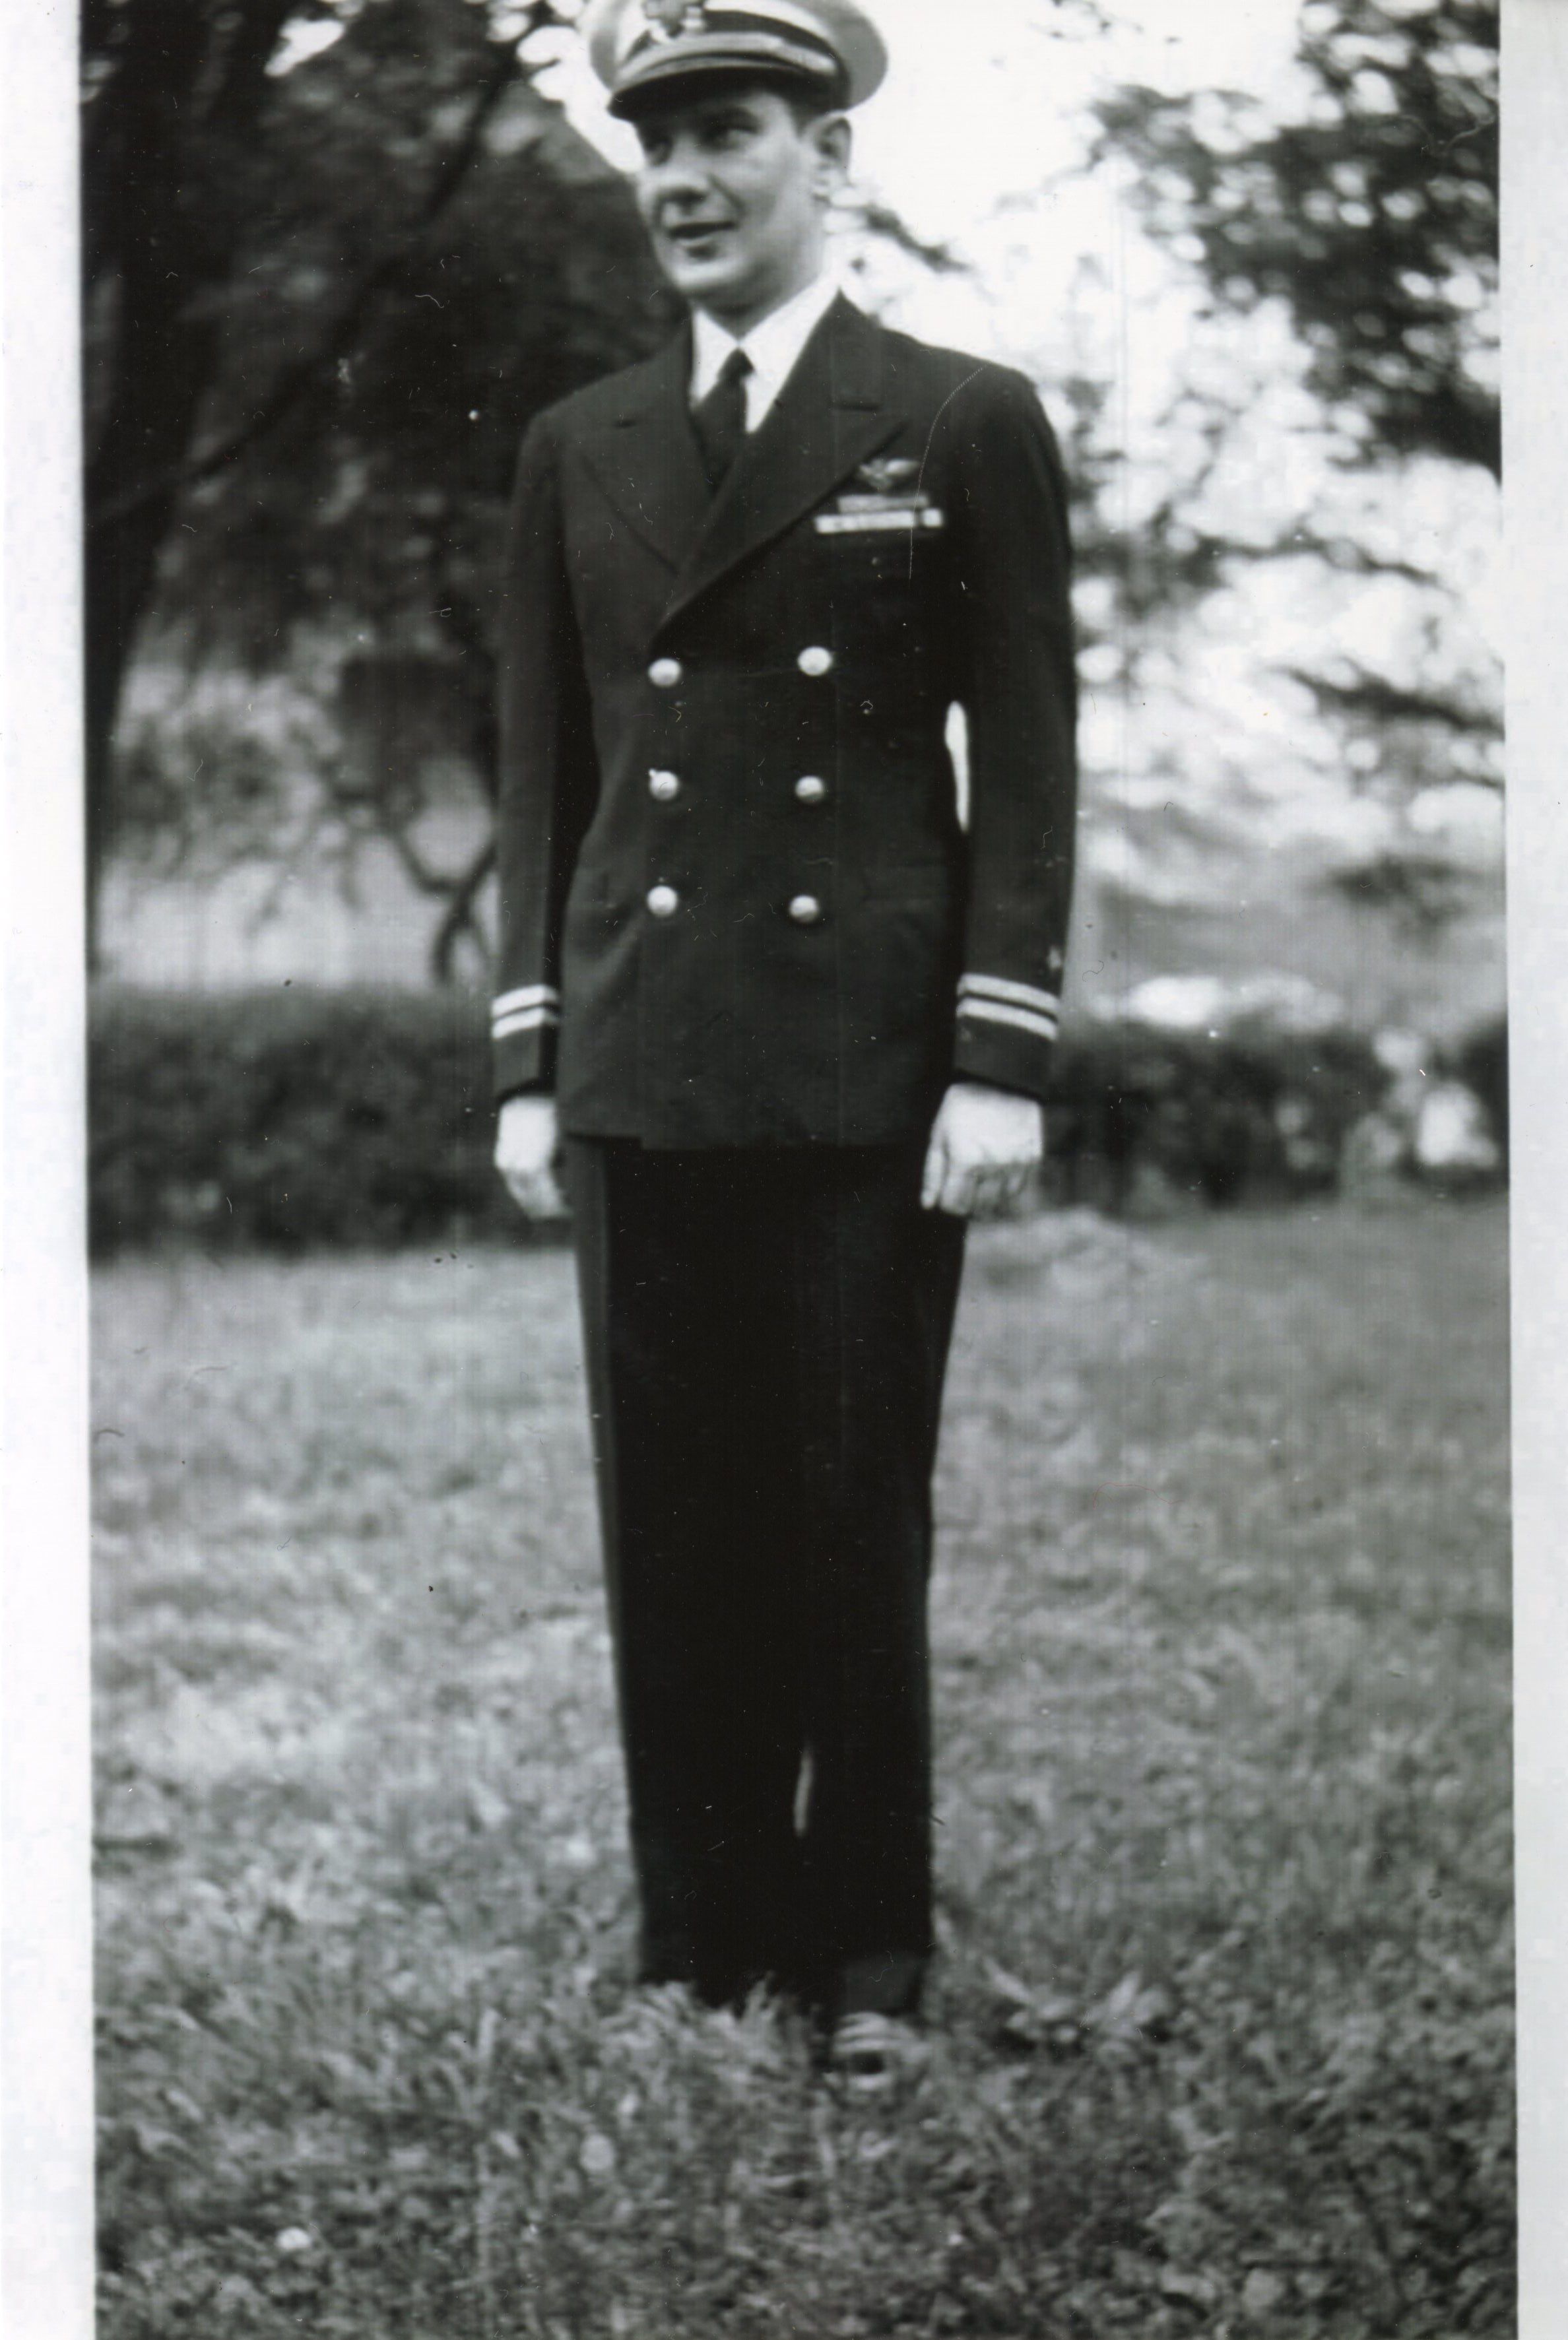 Primary Image of Gerald Hennesy in Full Dress Uniform